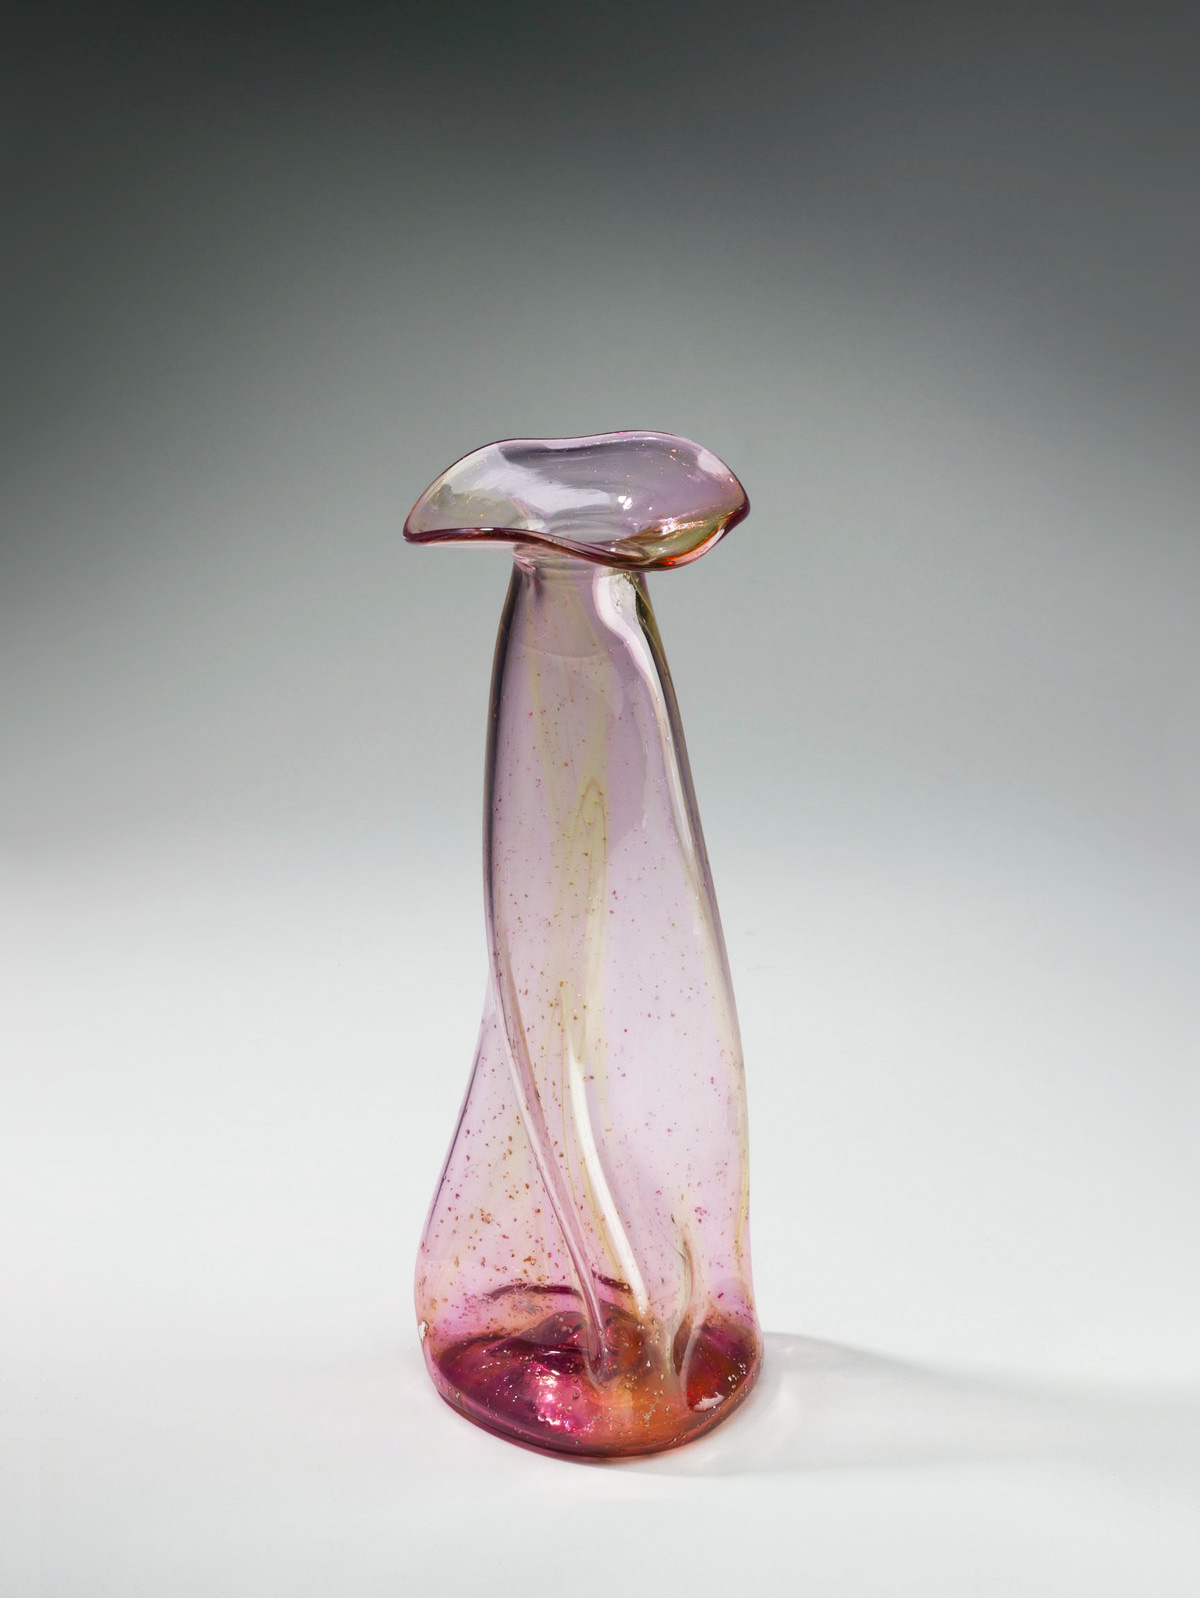 A twisted, tall glass vase with a small mouth.